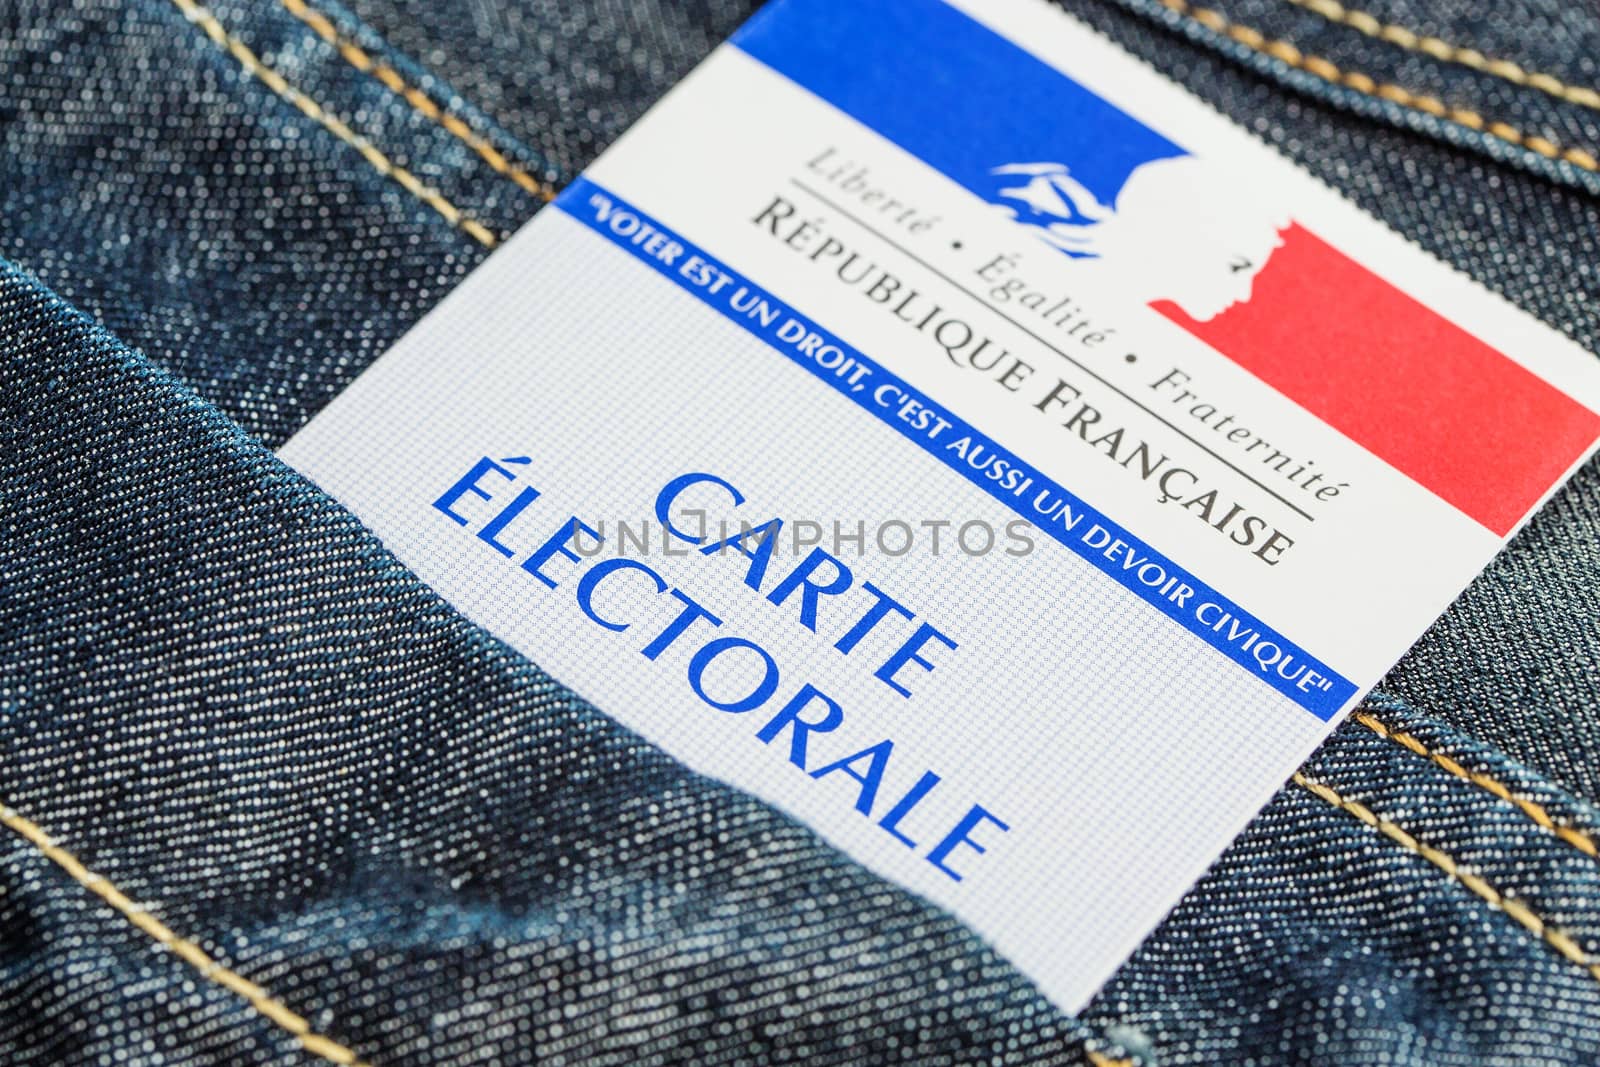 French electoral card in the rear pocket of a jeans, 2017 presidential and legislative elections concept